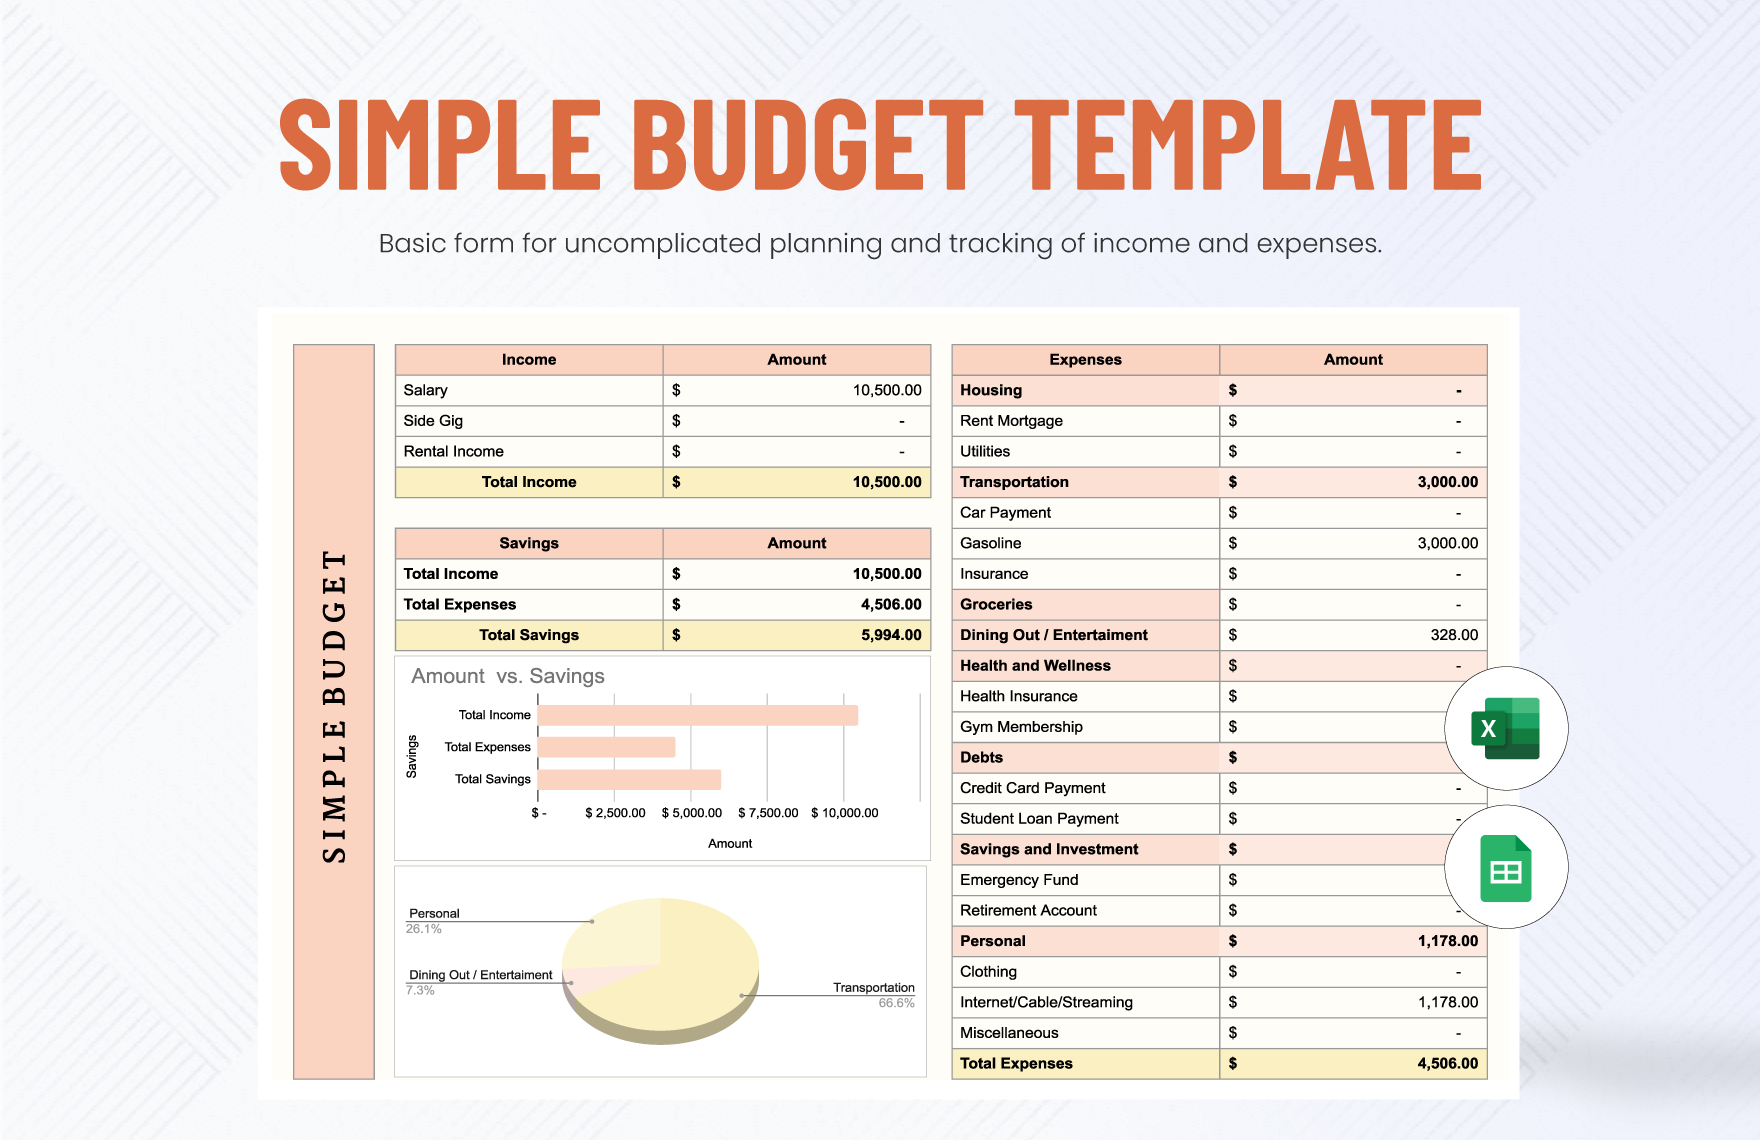 Free Simple Budget Template in Excel, Google Sheets